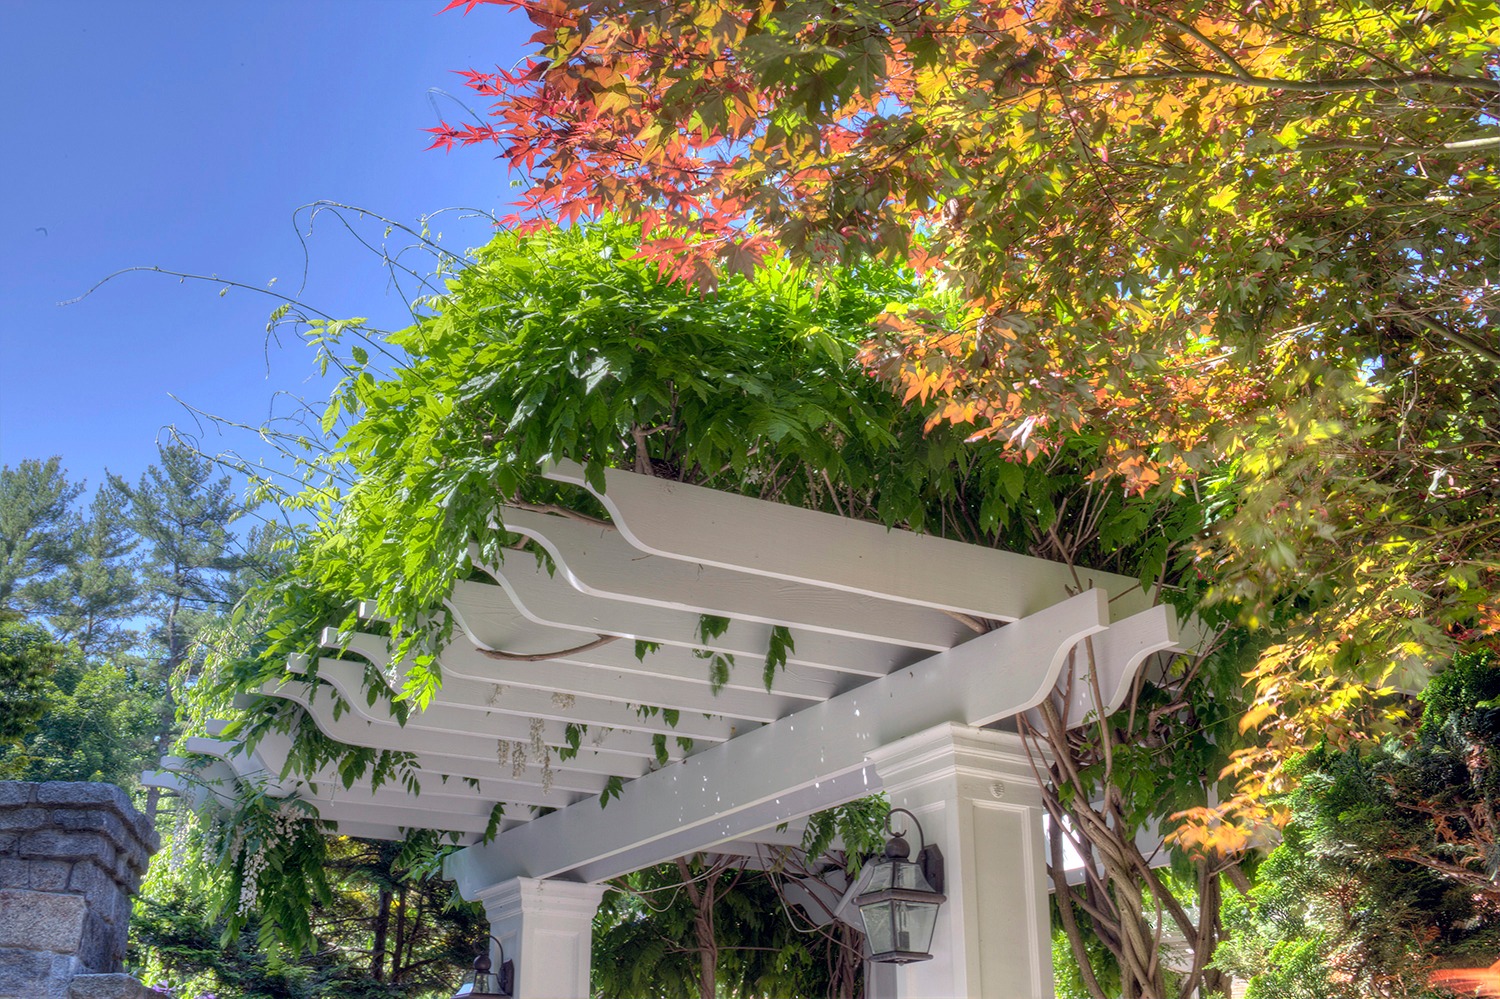 A white pergola adorned with creeping greenery and turning autumn leaves stands under a clear blue sky, flanked by trees with a stone pillar visible.